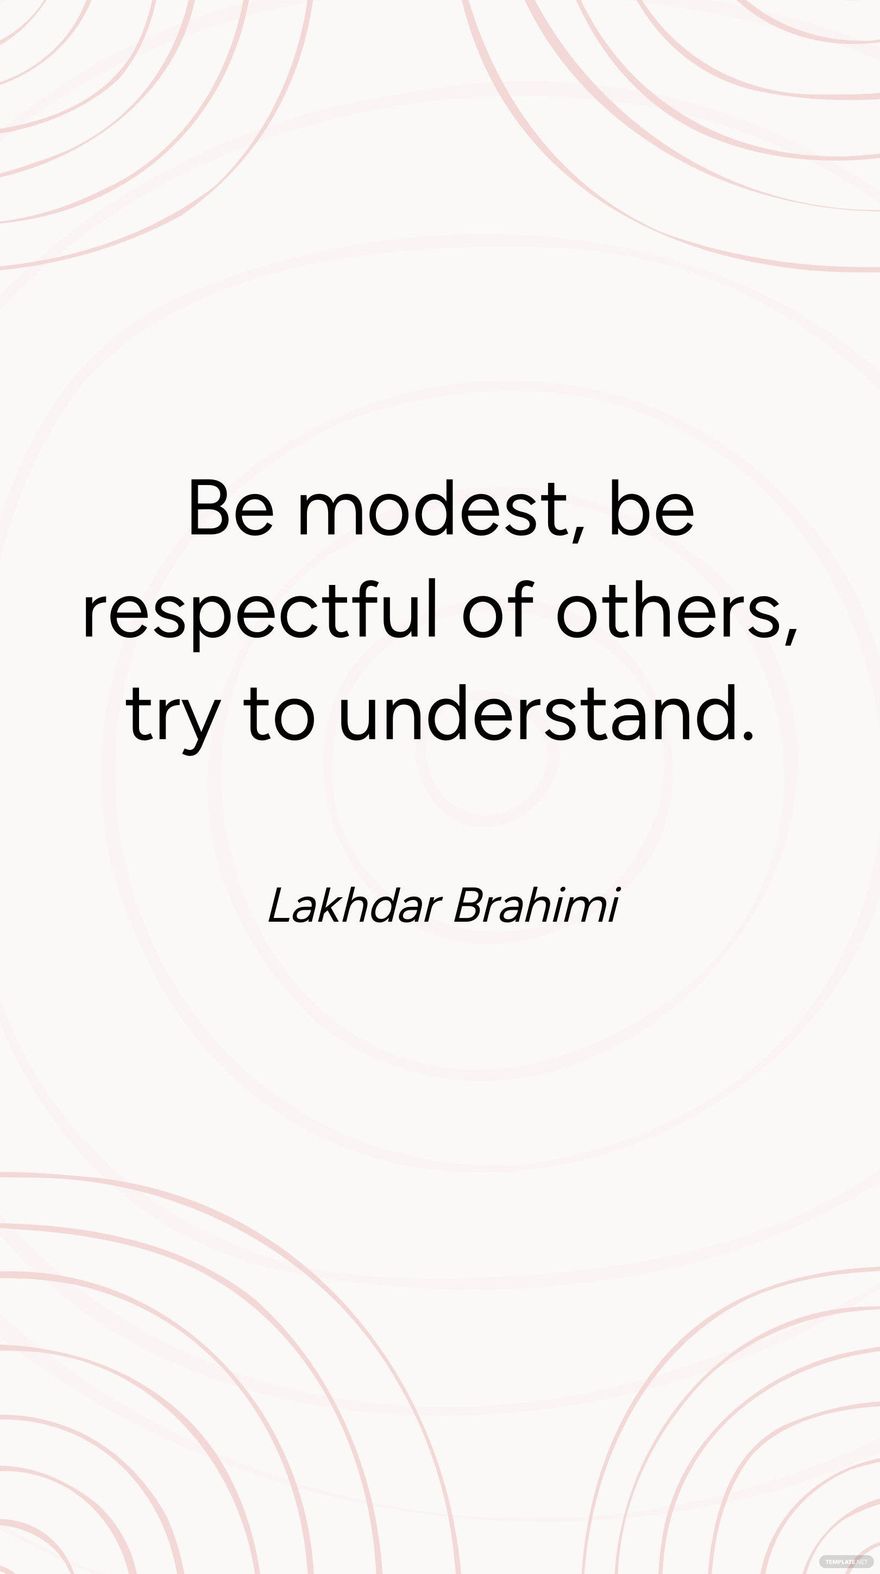 Lakhdar Brahimi - Be modest, be respectful of others, try to understand. in JPG